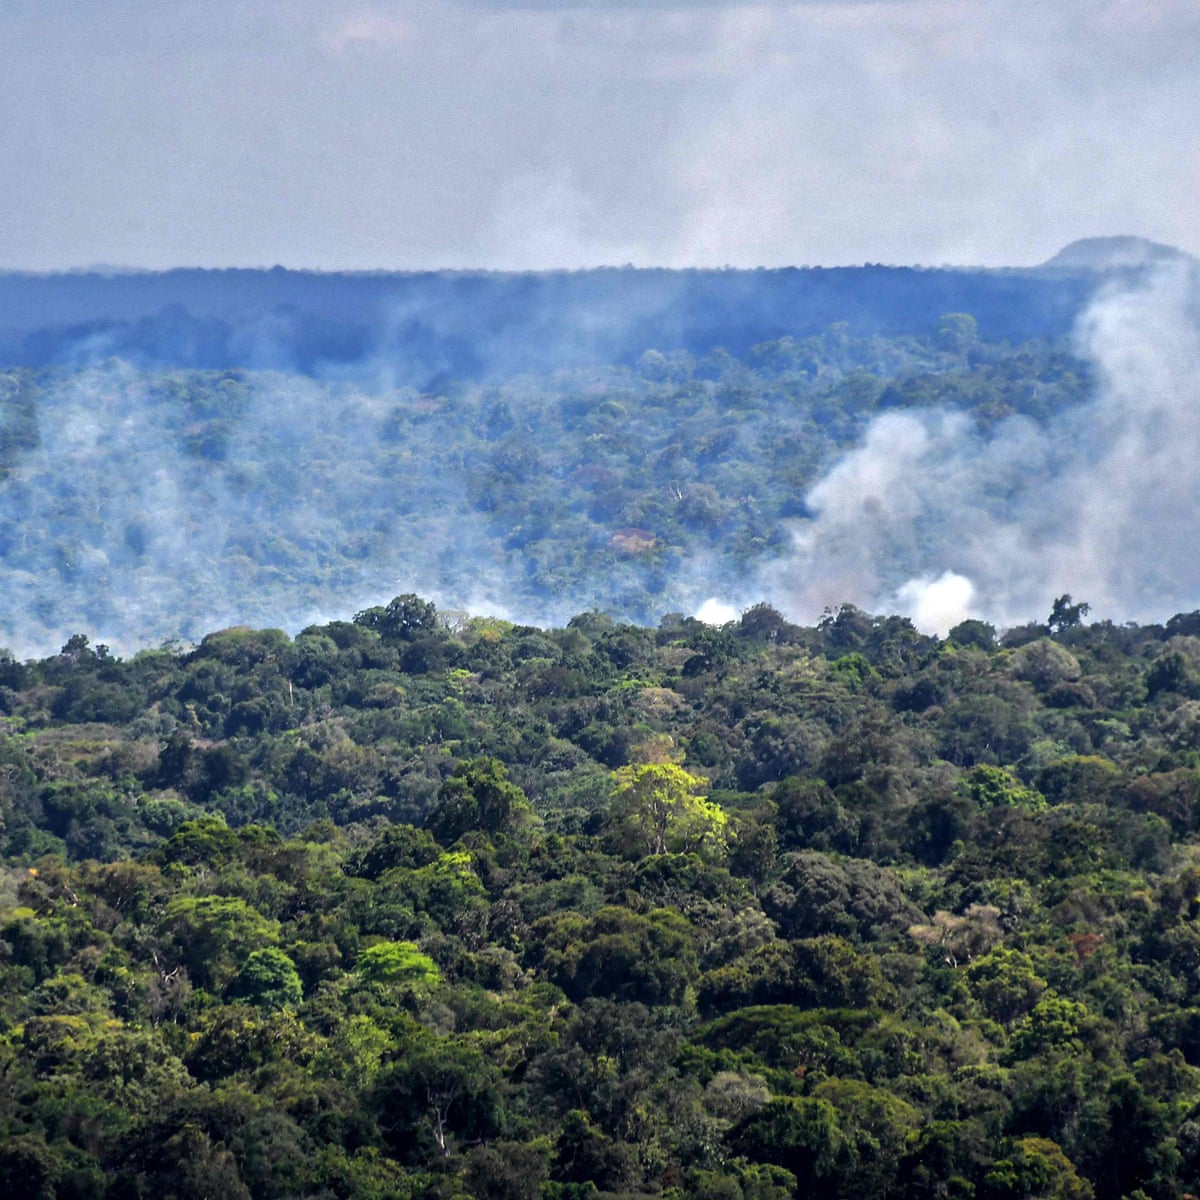 Destruction Of World S Forests Increased Sharply In Trees And Forests The Guardian